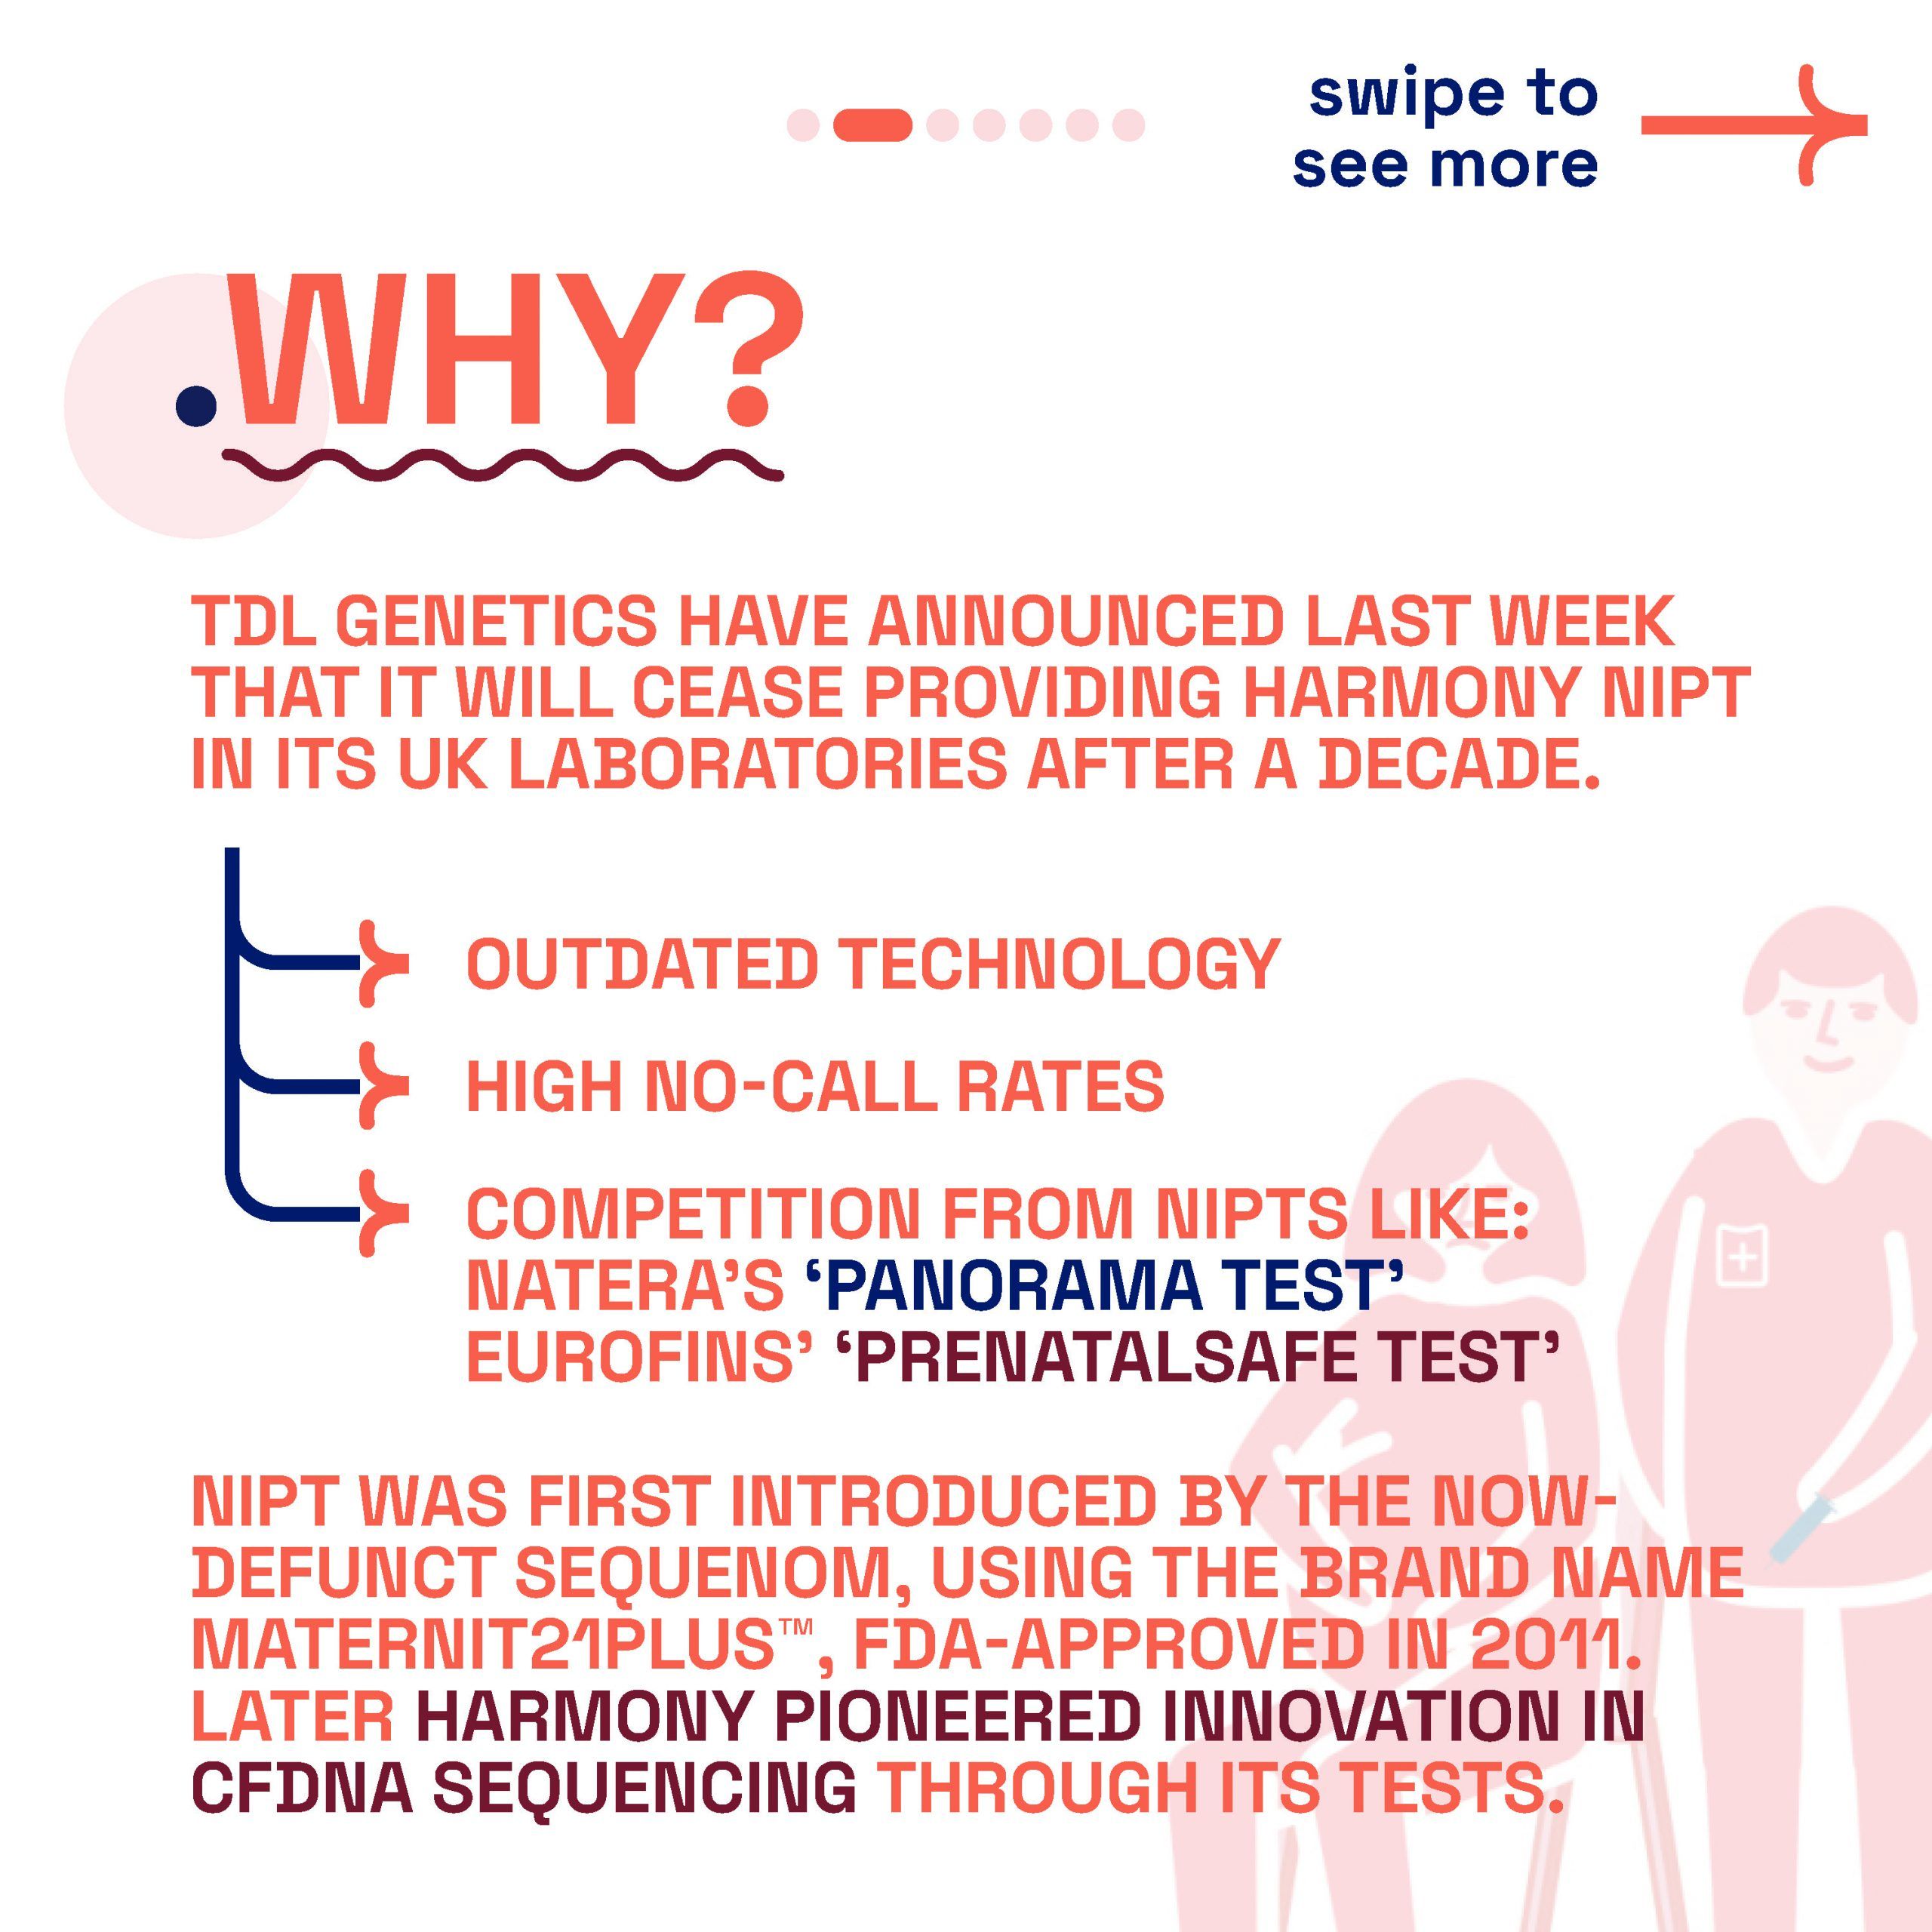 London Pregnancy Clinic's explanation for discontinuing Harmony NIPT due to outdated technology and competition, with a brief history of NIPT's development.